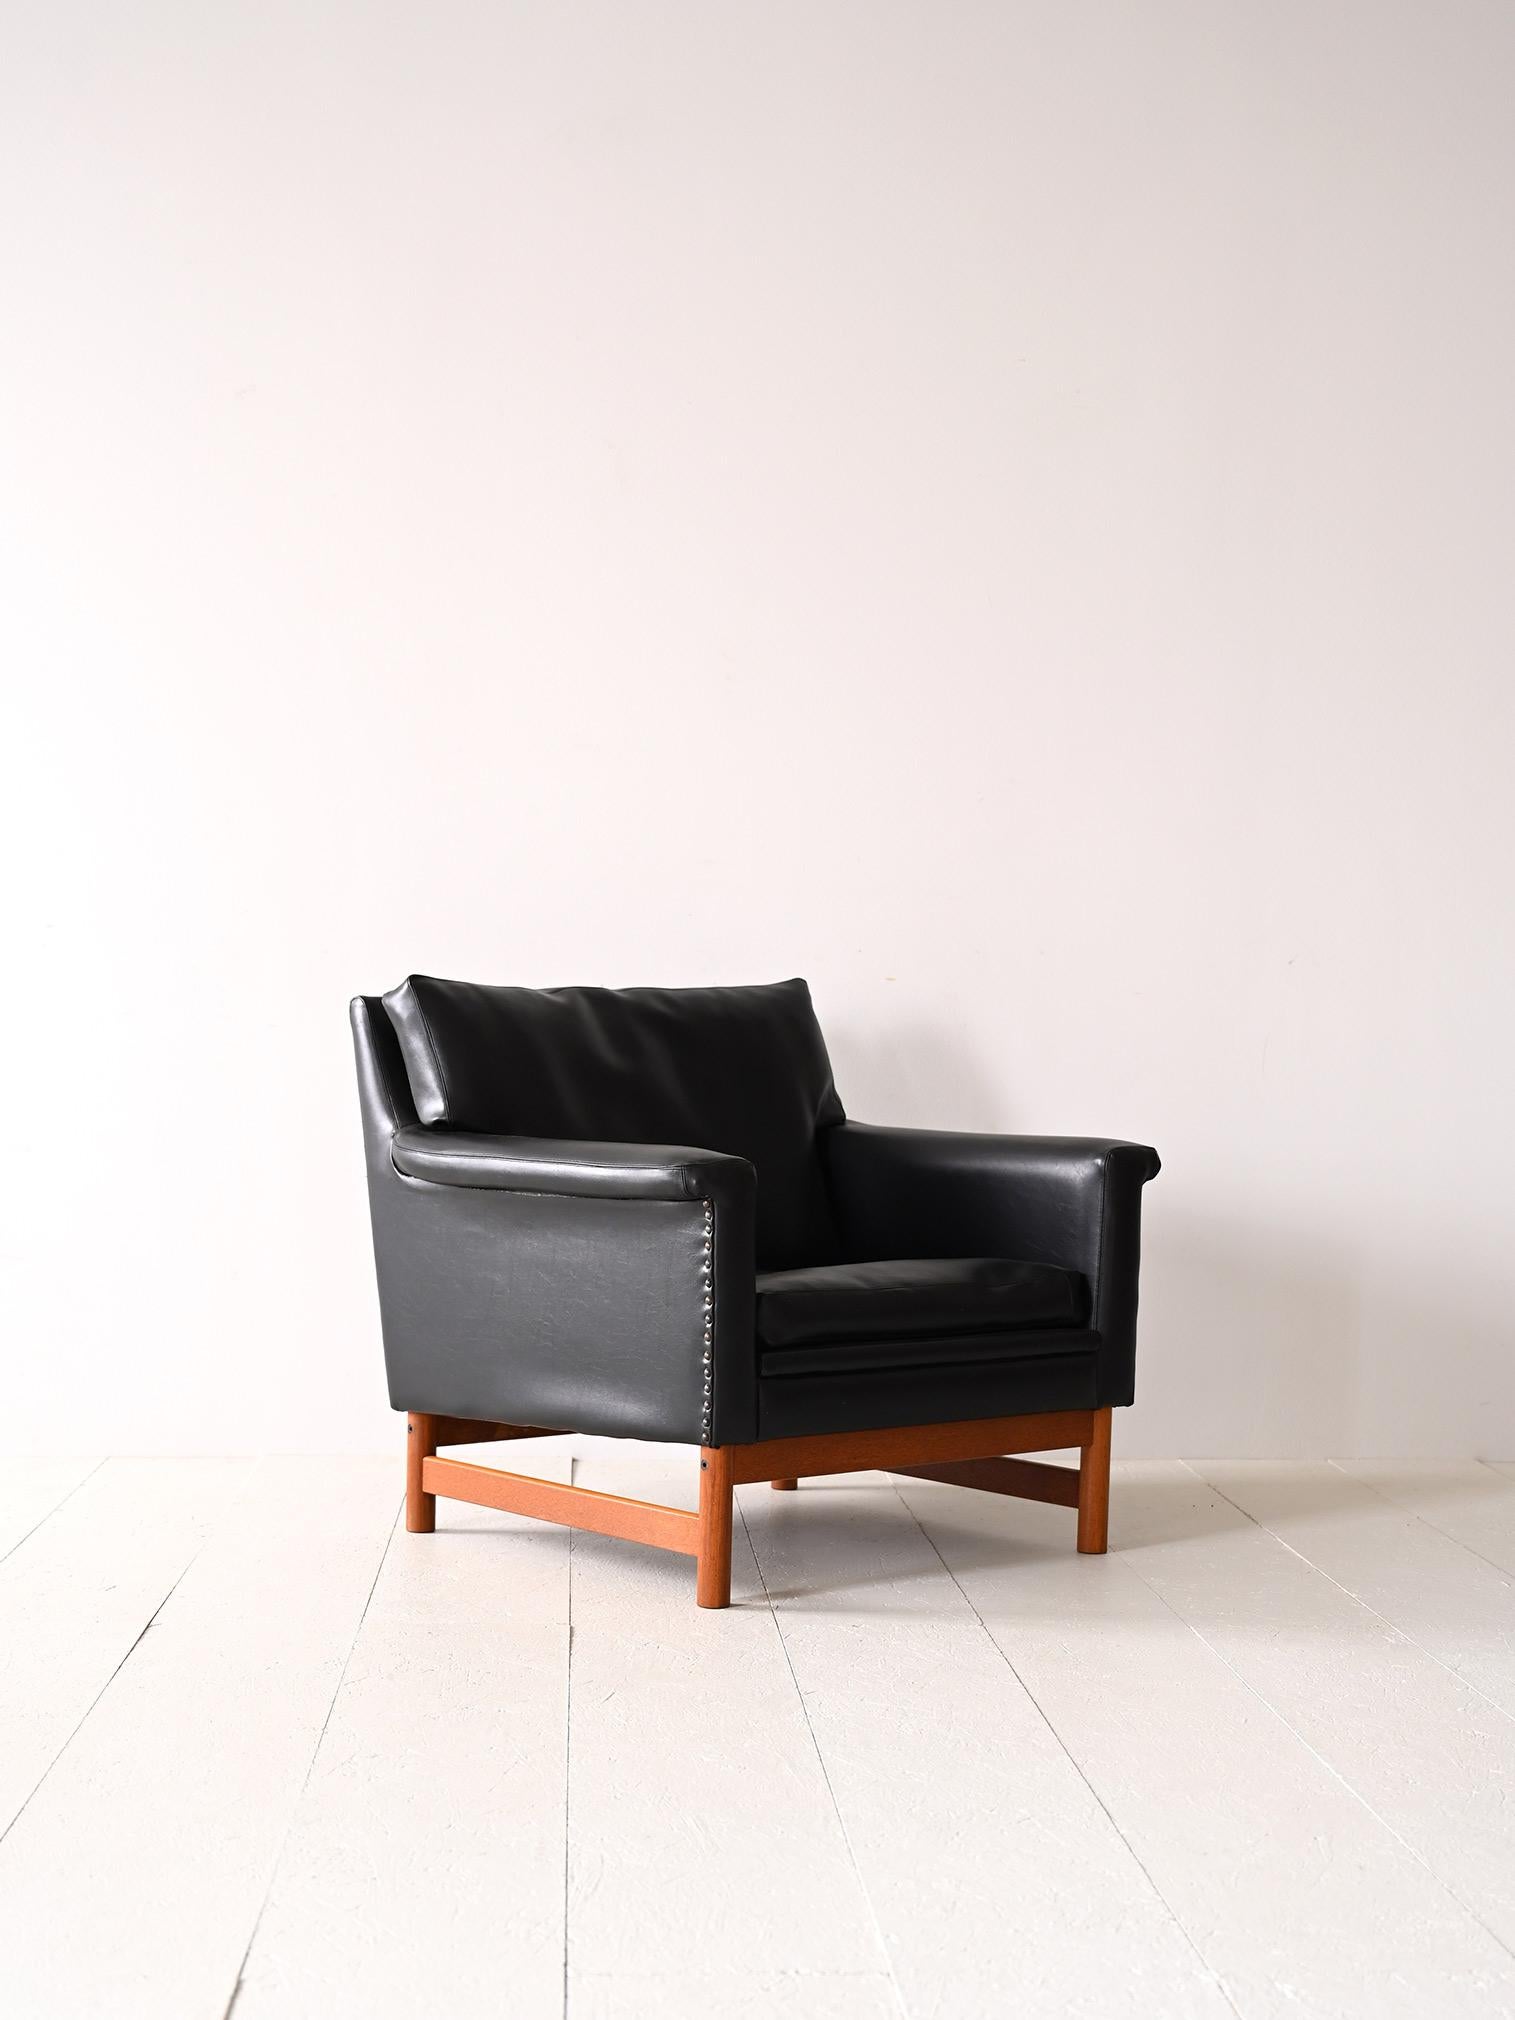 Scandinavian armchair from the 1960s.

A modern antique furniture piece with square, contemporary lines. Formed by a wooden base on which rests the upholstered seat lined with black leatherette. The condition of the springs and upholstery is in good